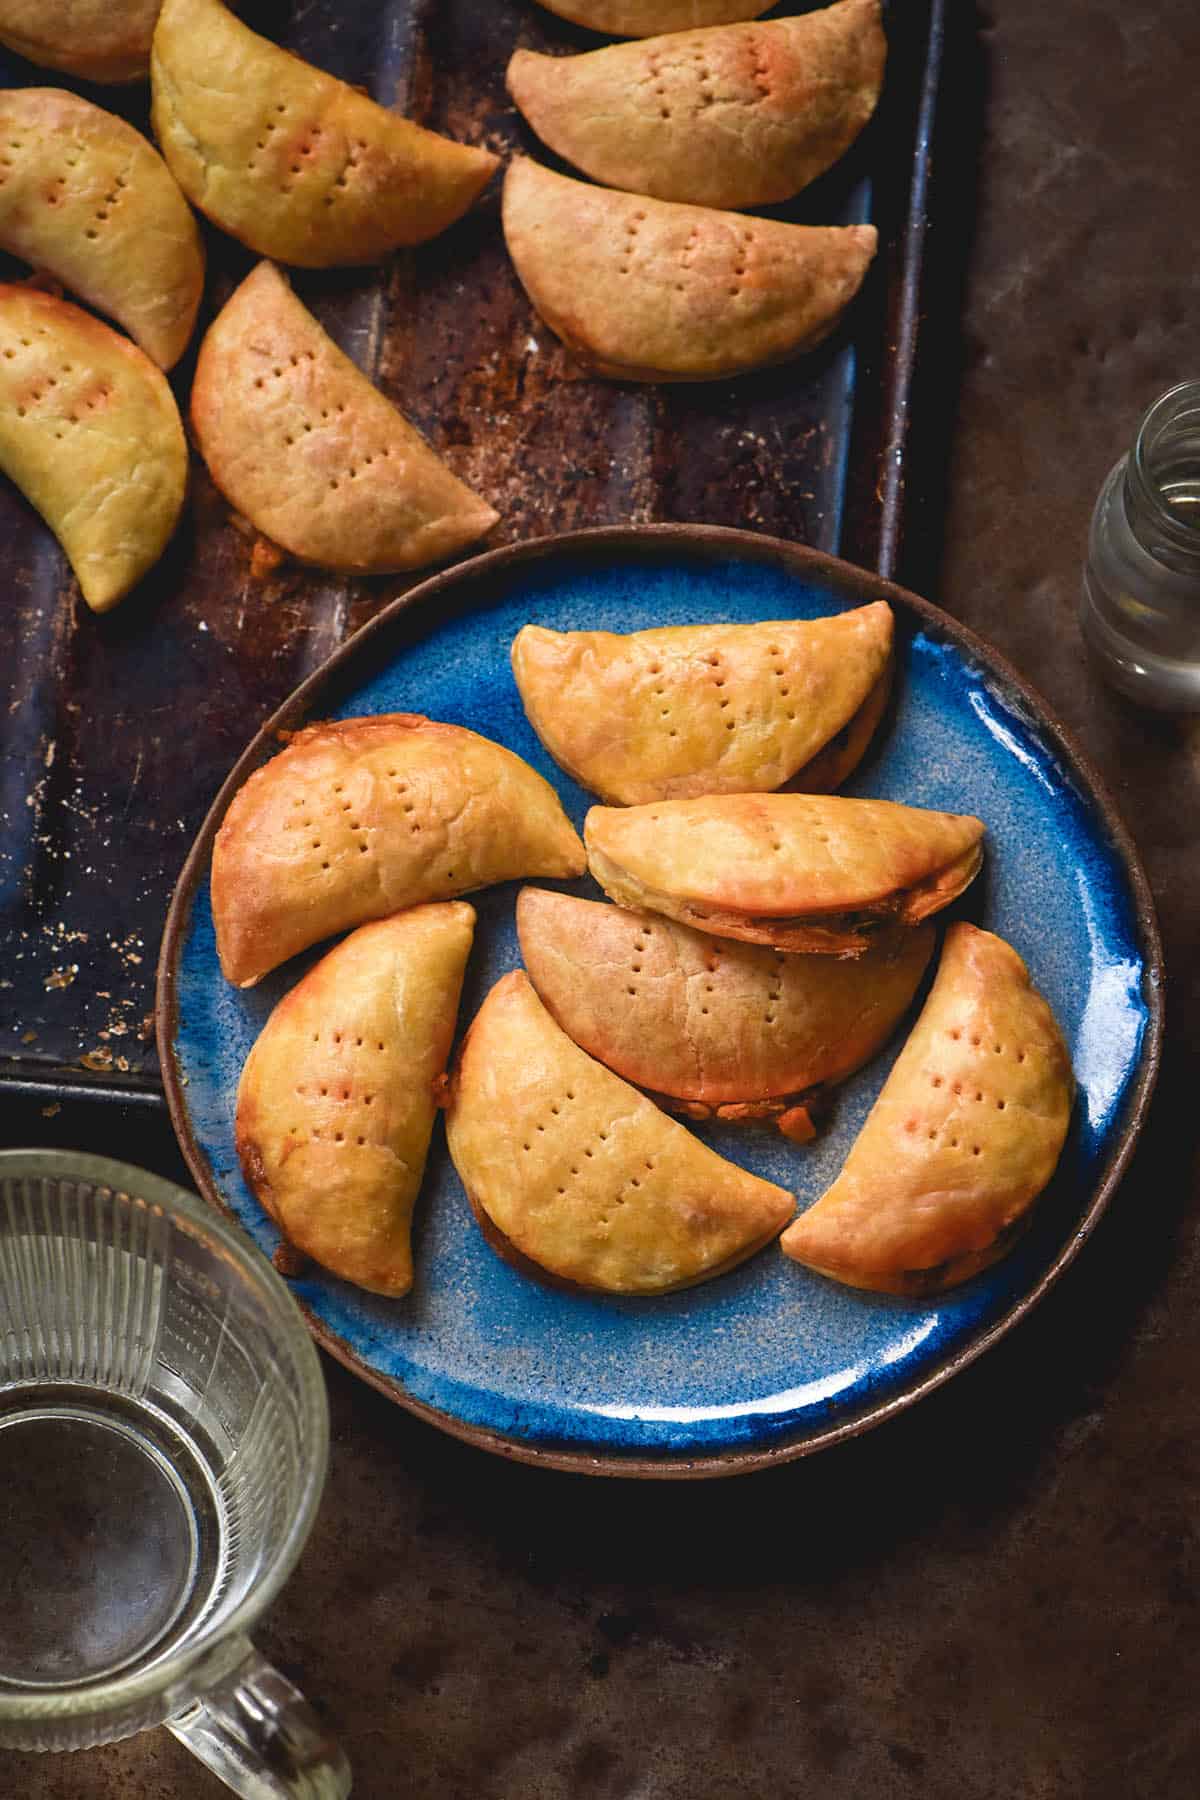 An aerial image of a blue plate of gluten free empanadas on a rusty auburn backdrop. More empanadas sit on a baking tray above the plate, and a water jug sits to the bottom left of the plate.